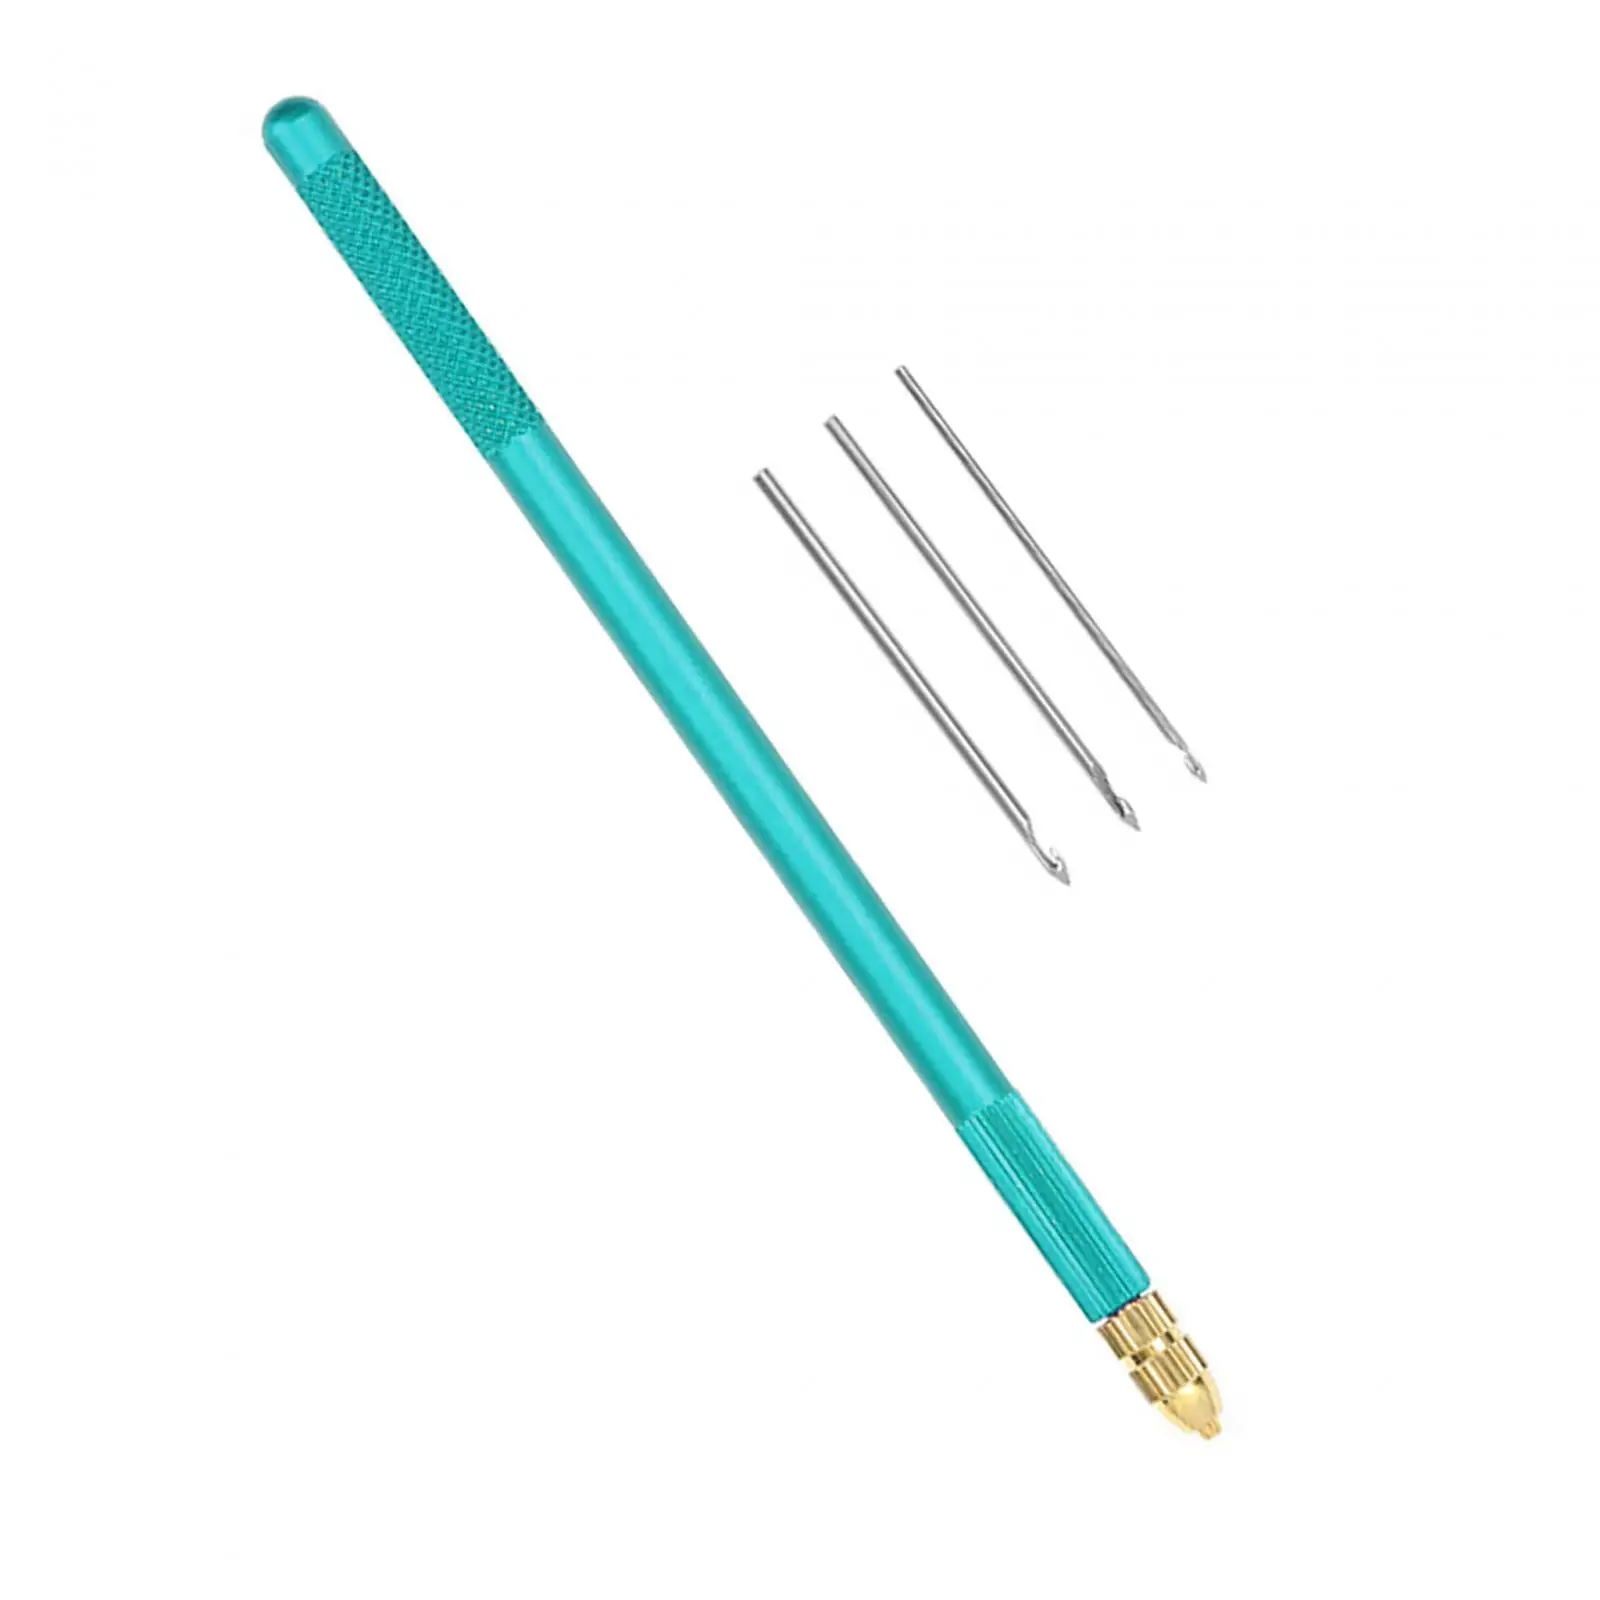 Tambour Crochet Hook with 3 Needles Sequin Beads Set French Crochet Tool Beading Crochet Tool for Embroidering Punching Women